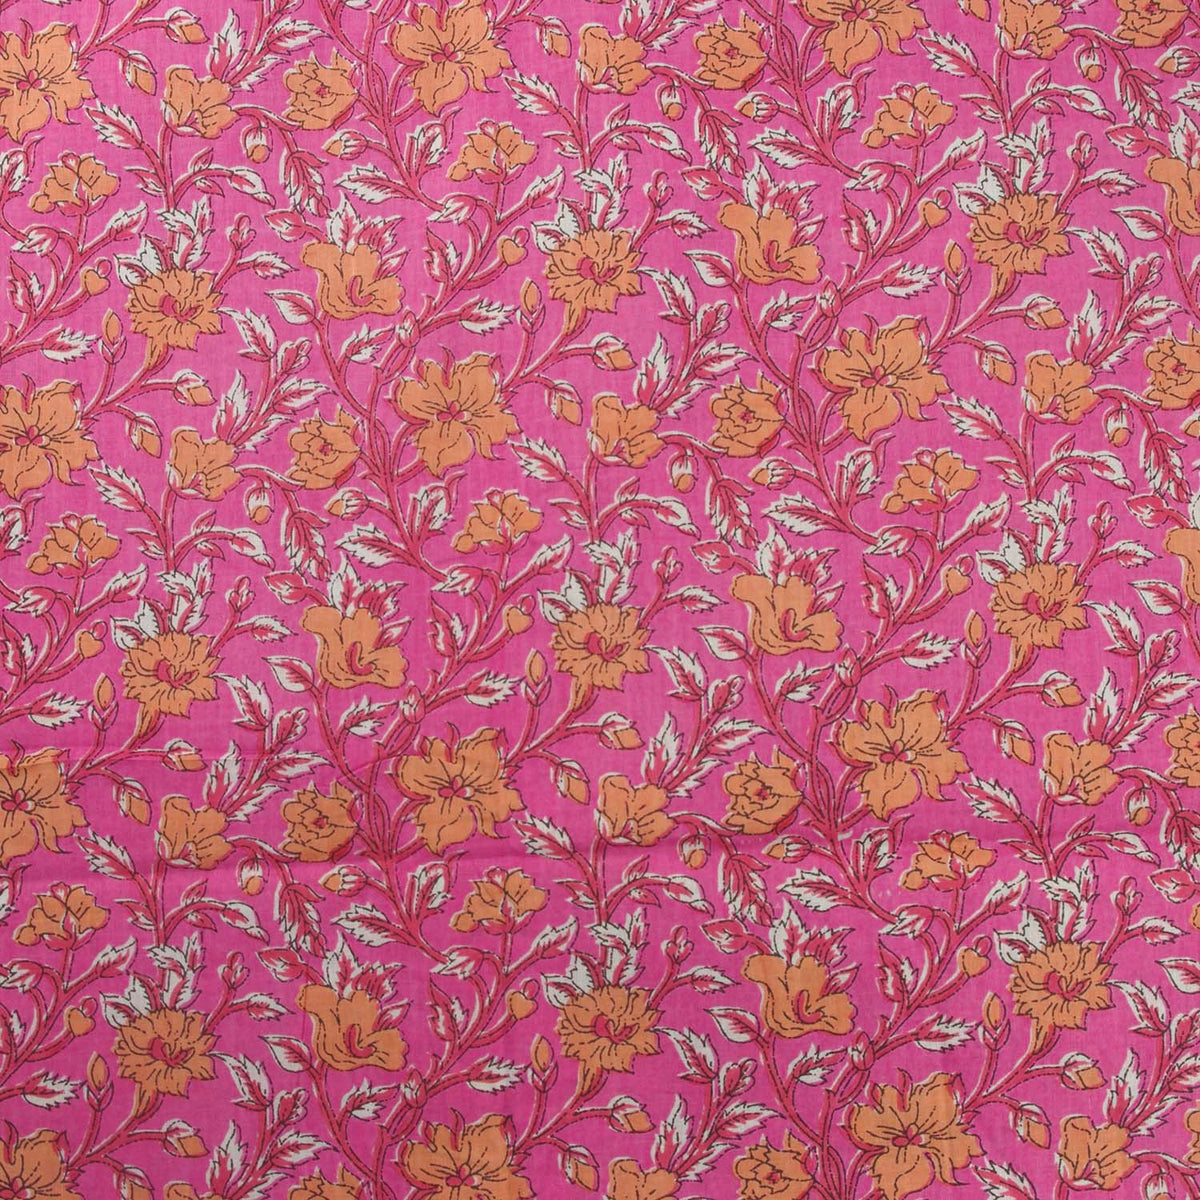 Fall Flowers On Pink Hand Block Printed Cotton Fabric Design 534